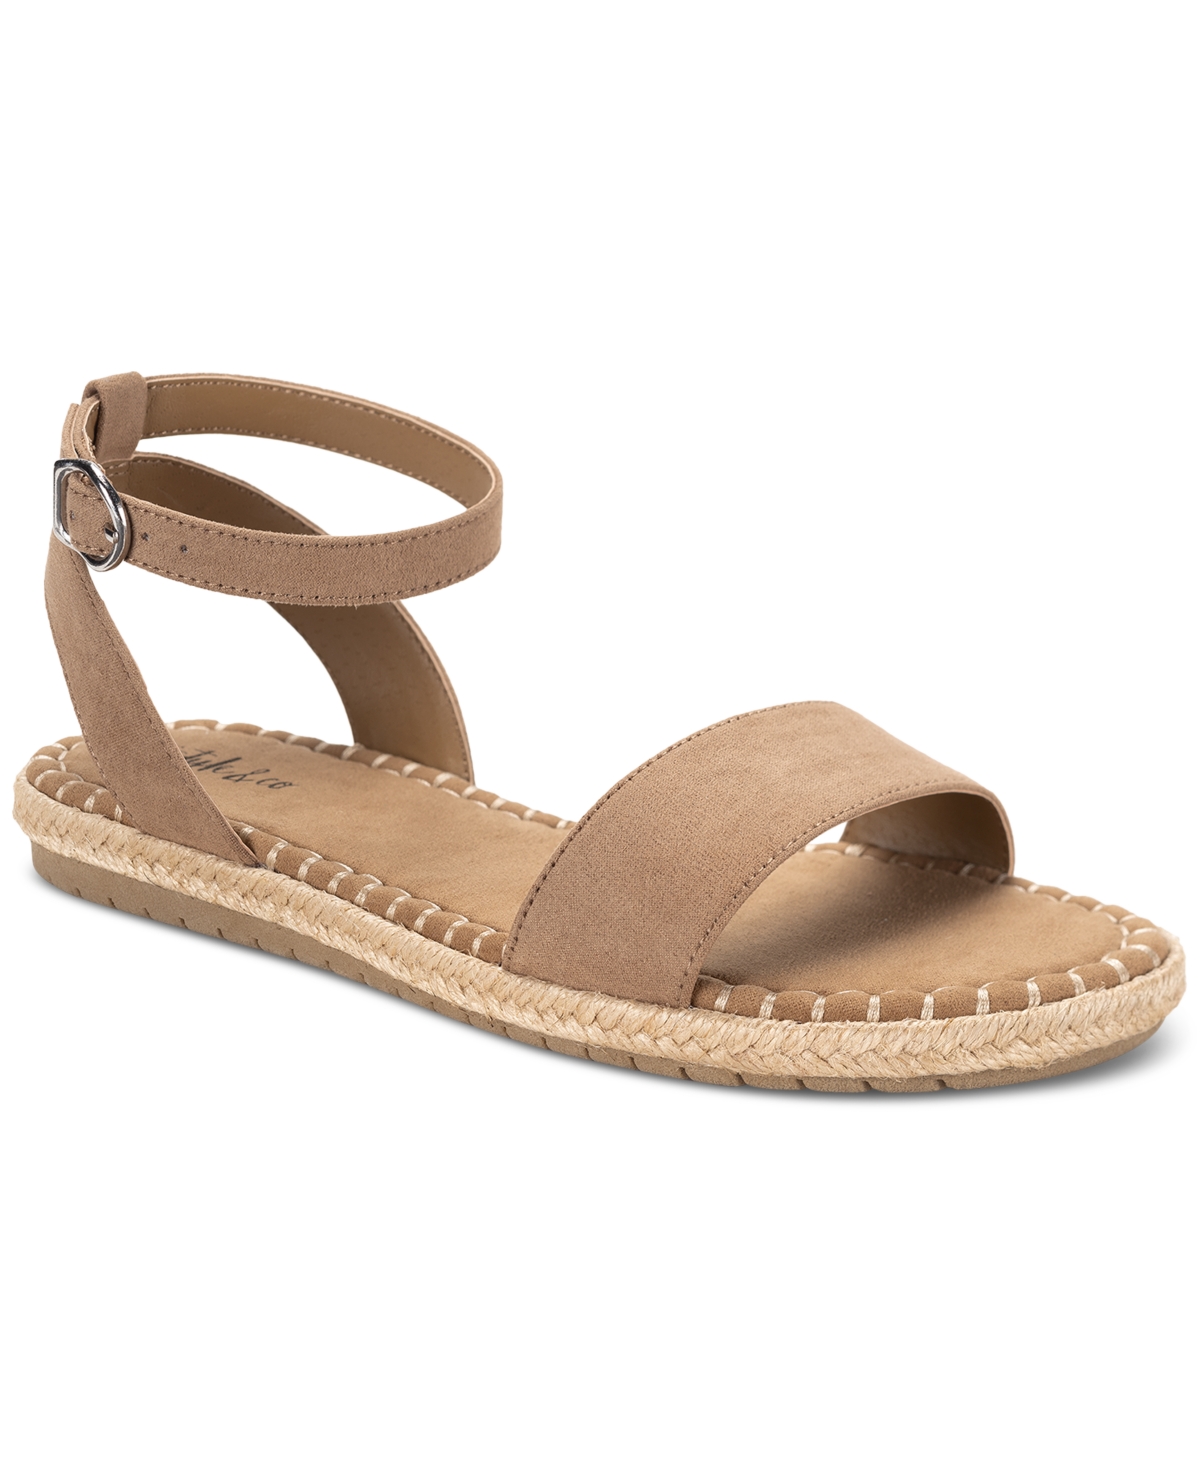 Peggyy Ankle-Strap Espadrille Flat Sandals, Created for Macy's - Taupe Micro